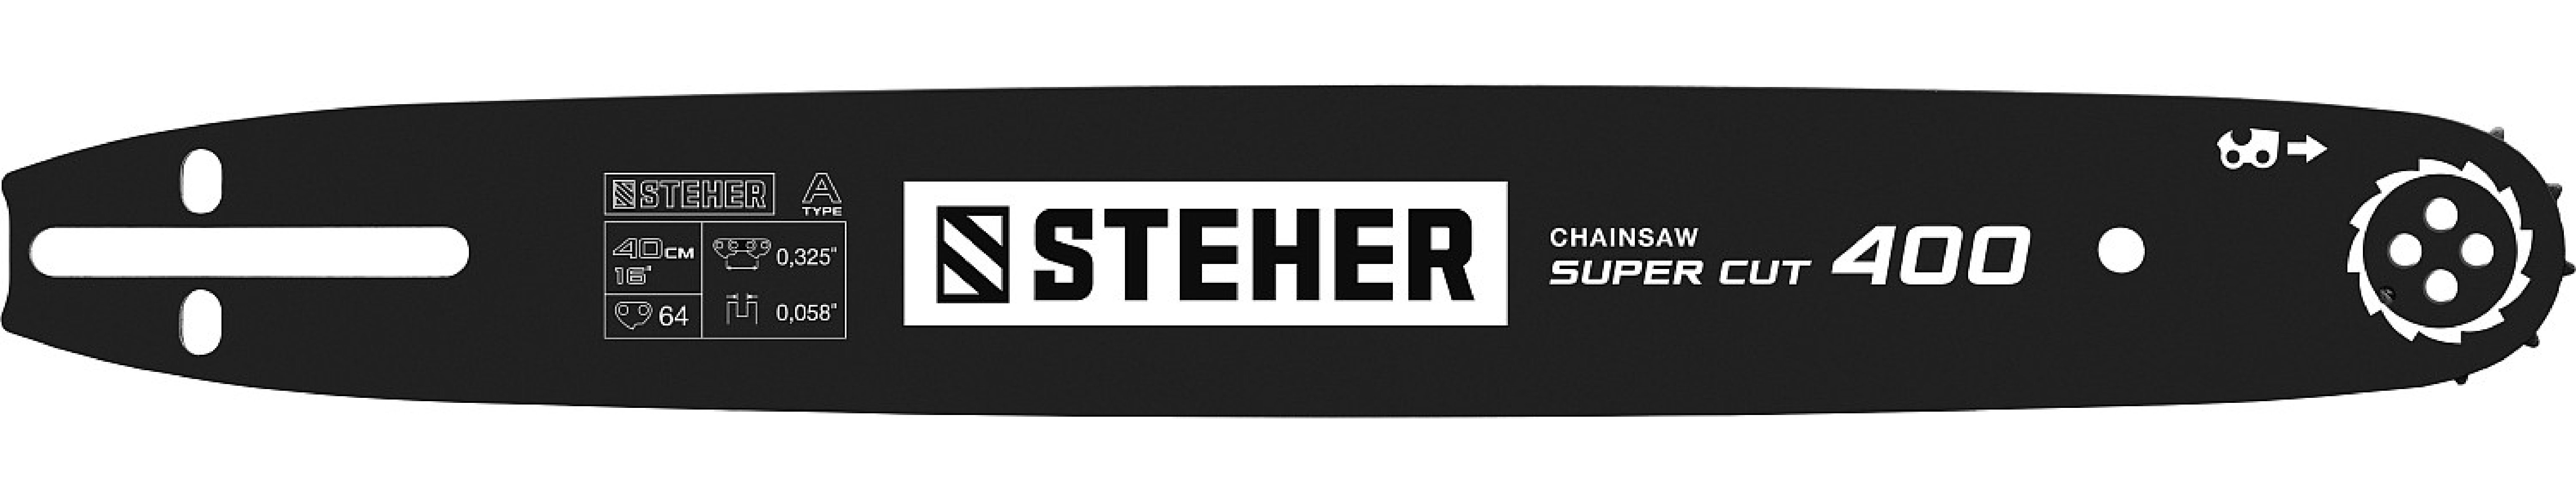 STEHER type A  0.325  1.5  40     (75201-40)